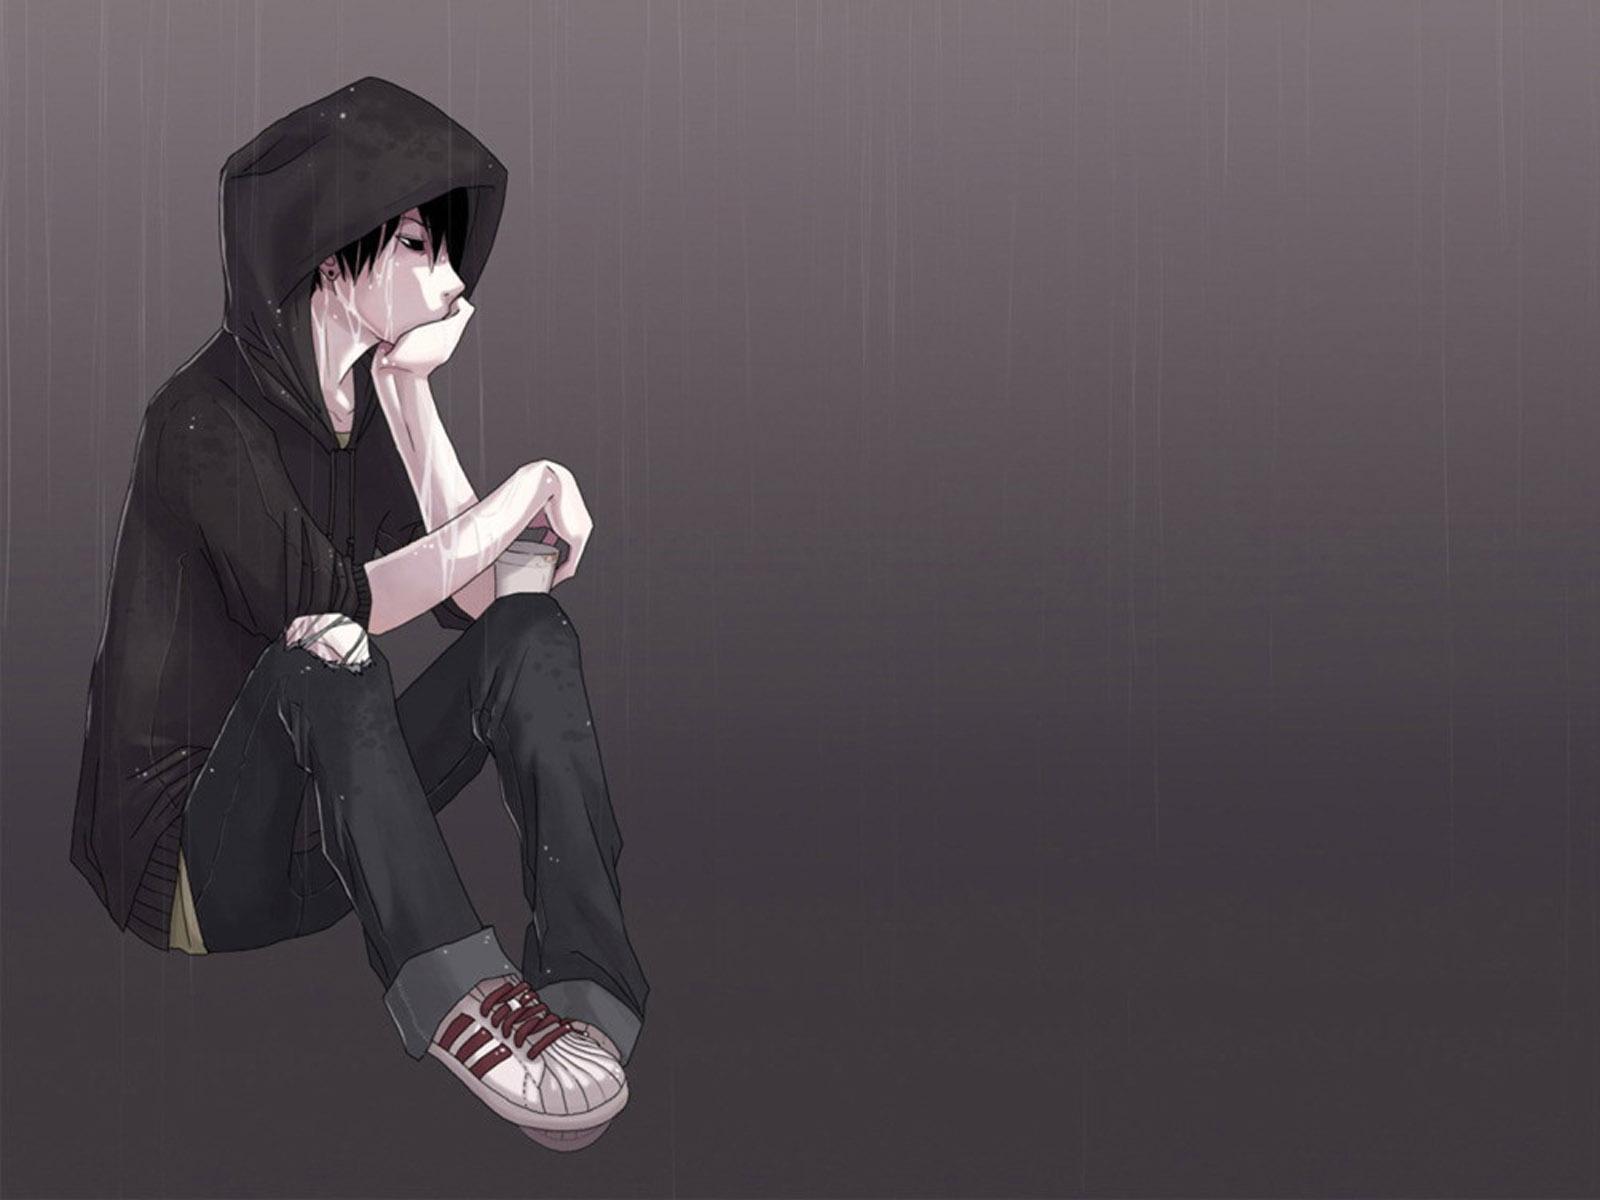 Alone Anime Boy Wallpapers - Wallpaper Cave